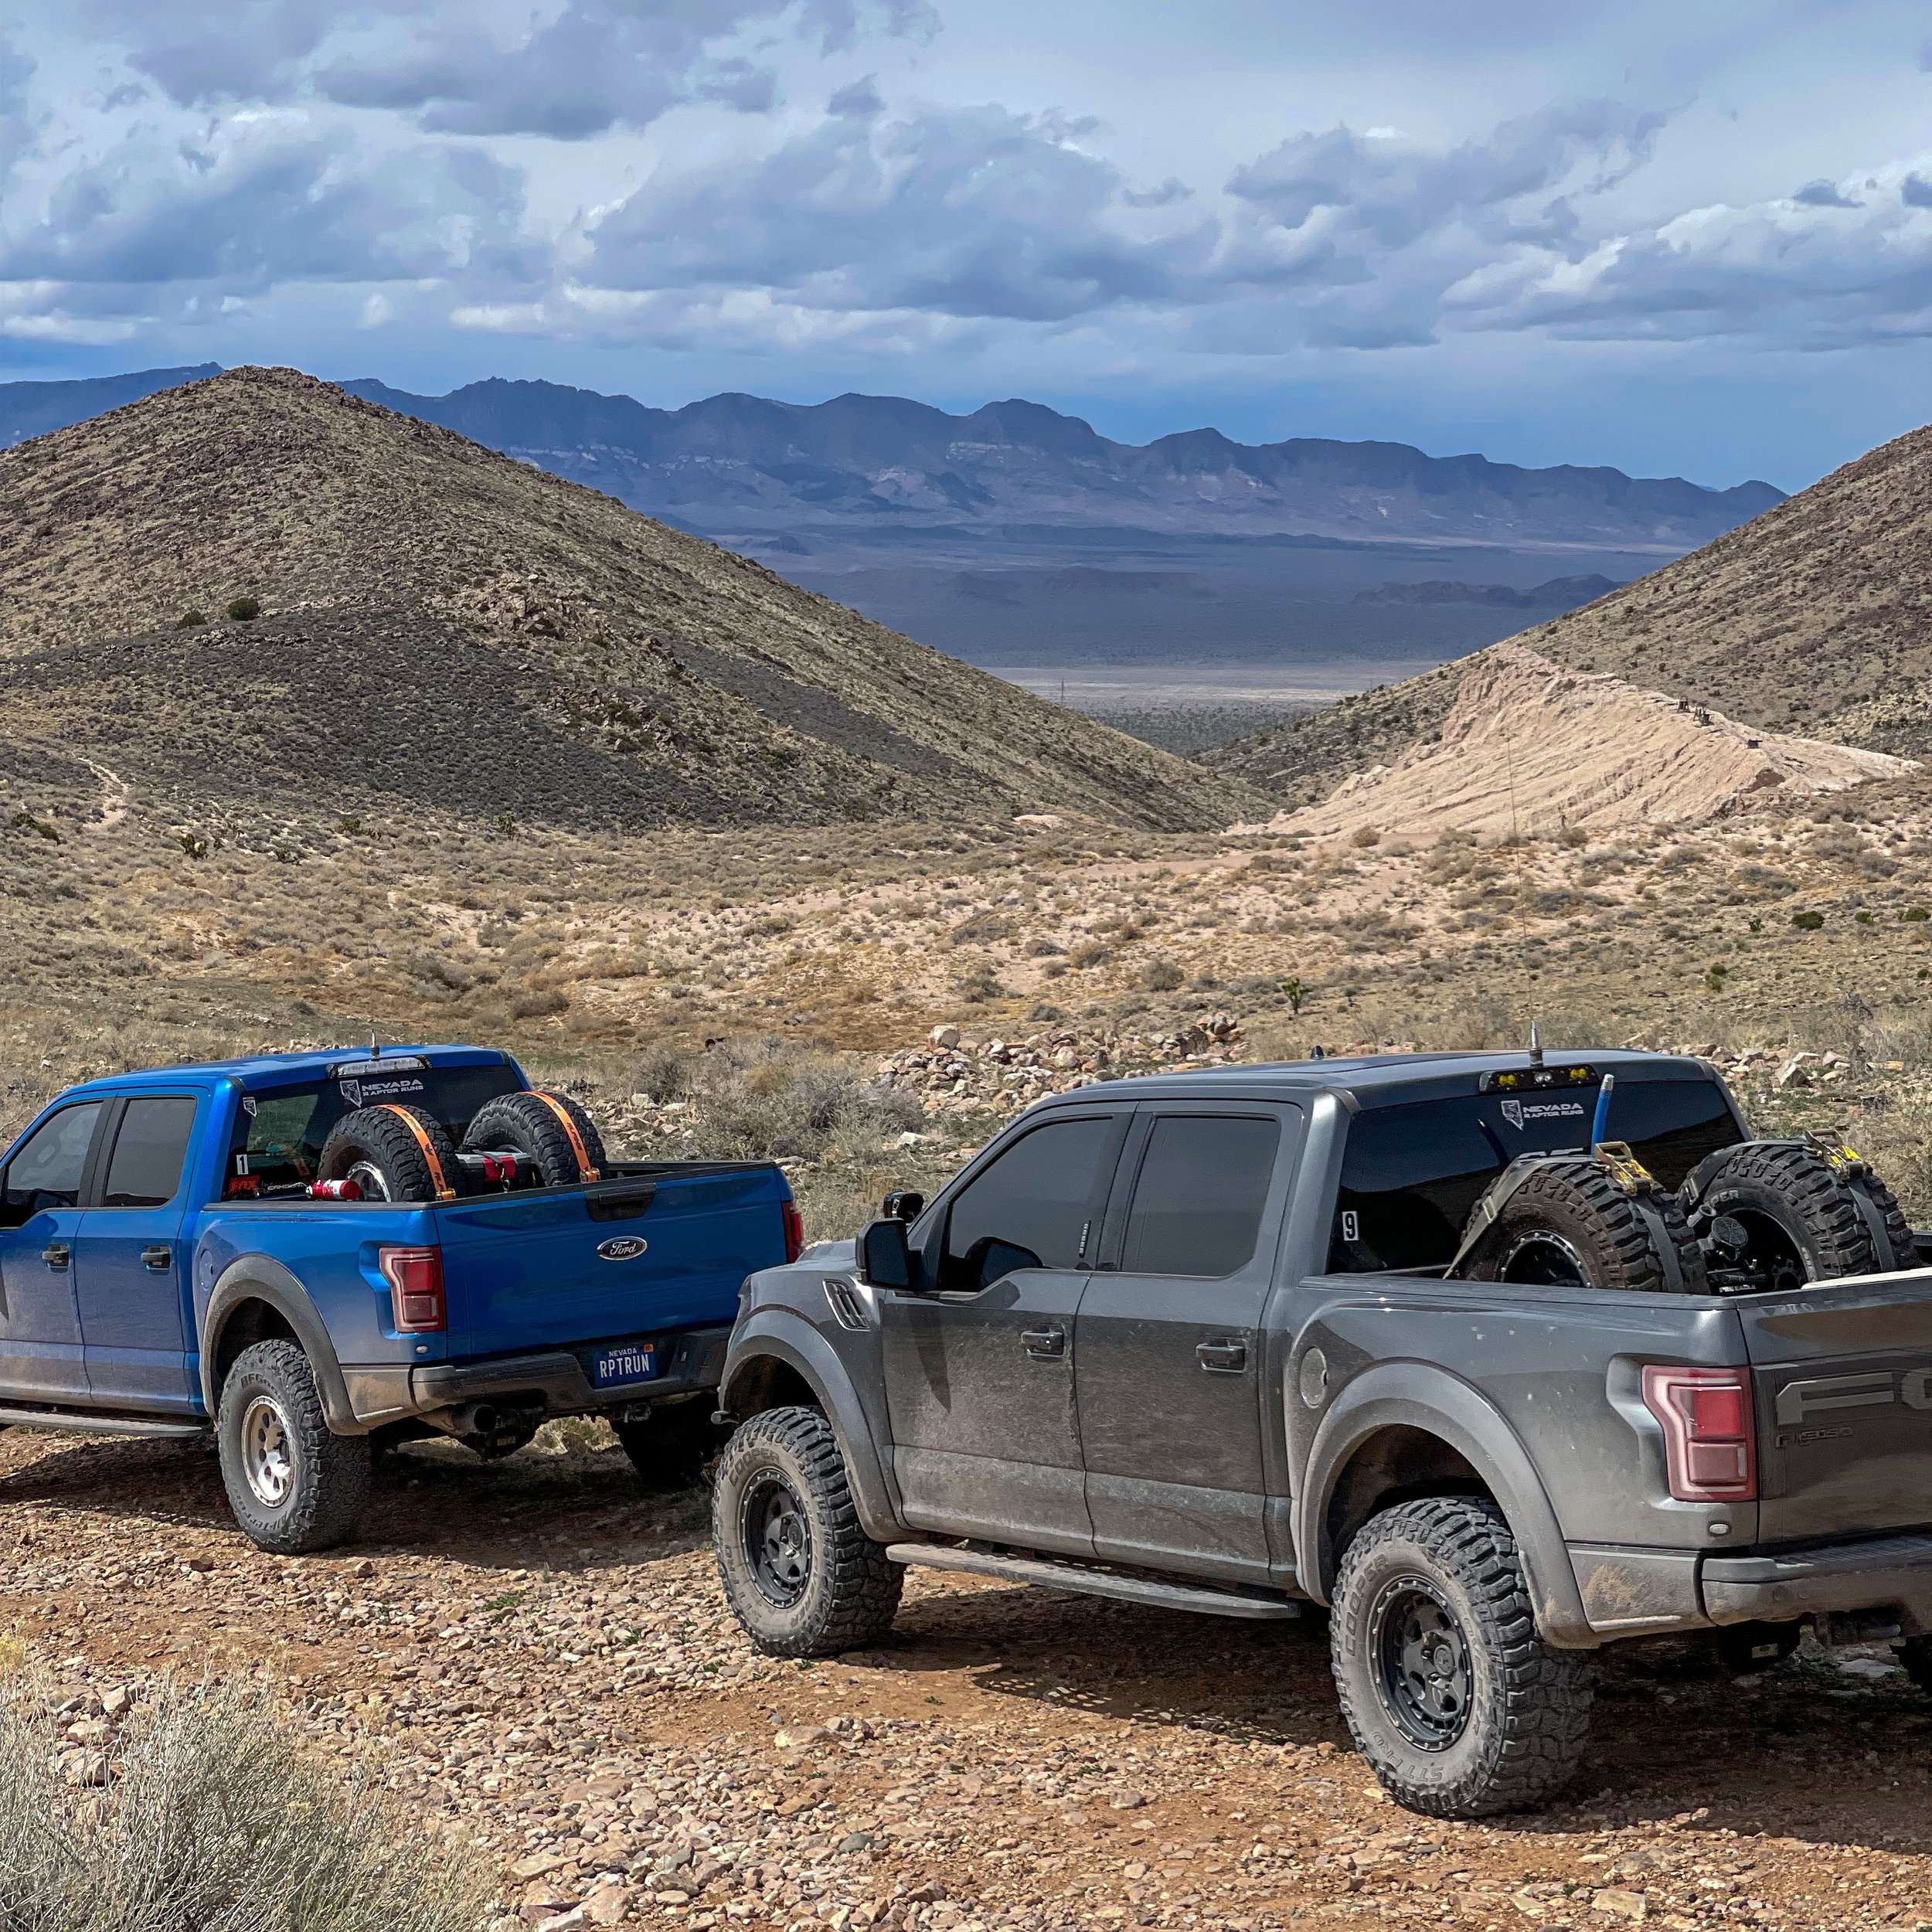 Just 19 days until we take in all the sights. 

Want to sign up for our next off road experience? Join at www.NevadaRaptorRuns.com

_____________________________
.
.
.
.
.
.
.
#nevadaraptorruns#offroad#ford#fordraptor#prerunner#desert#adventure#nevad